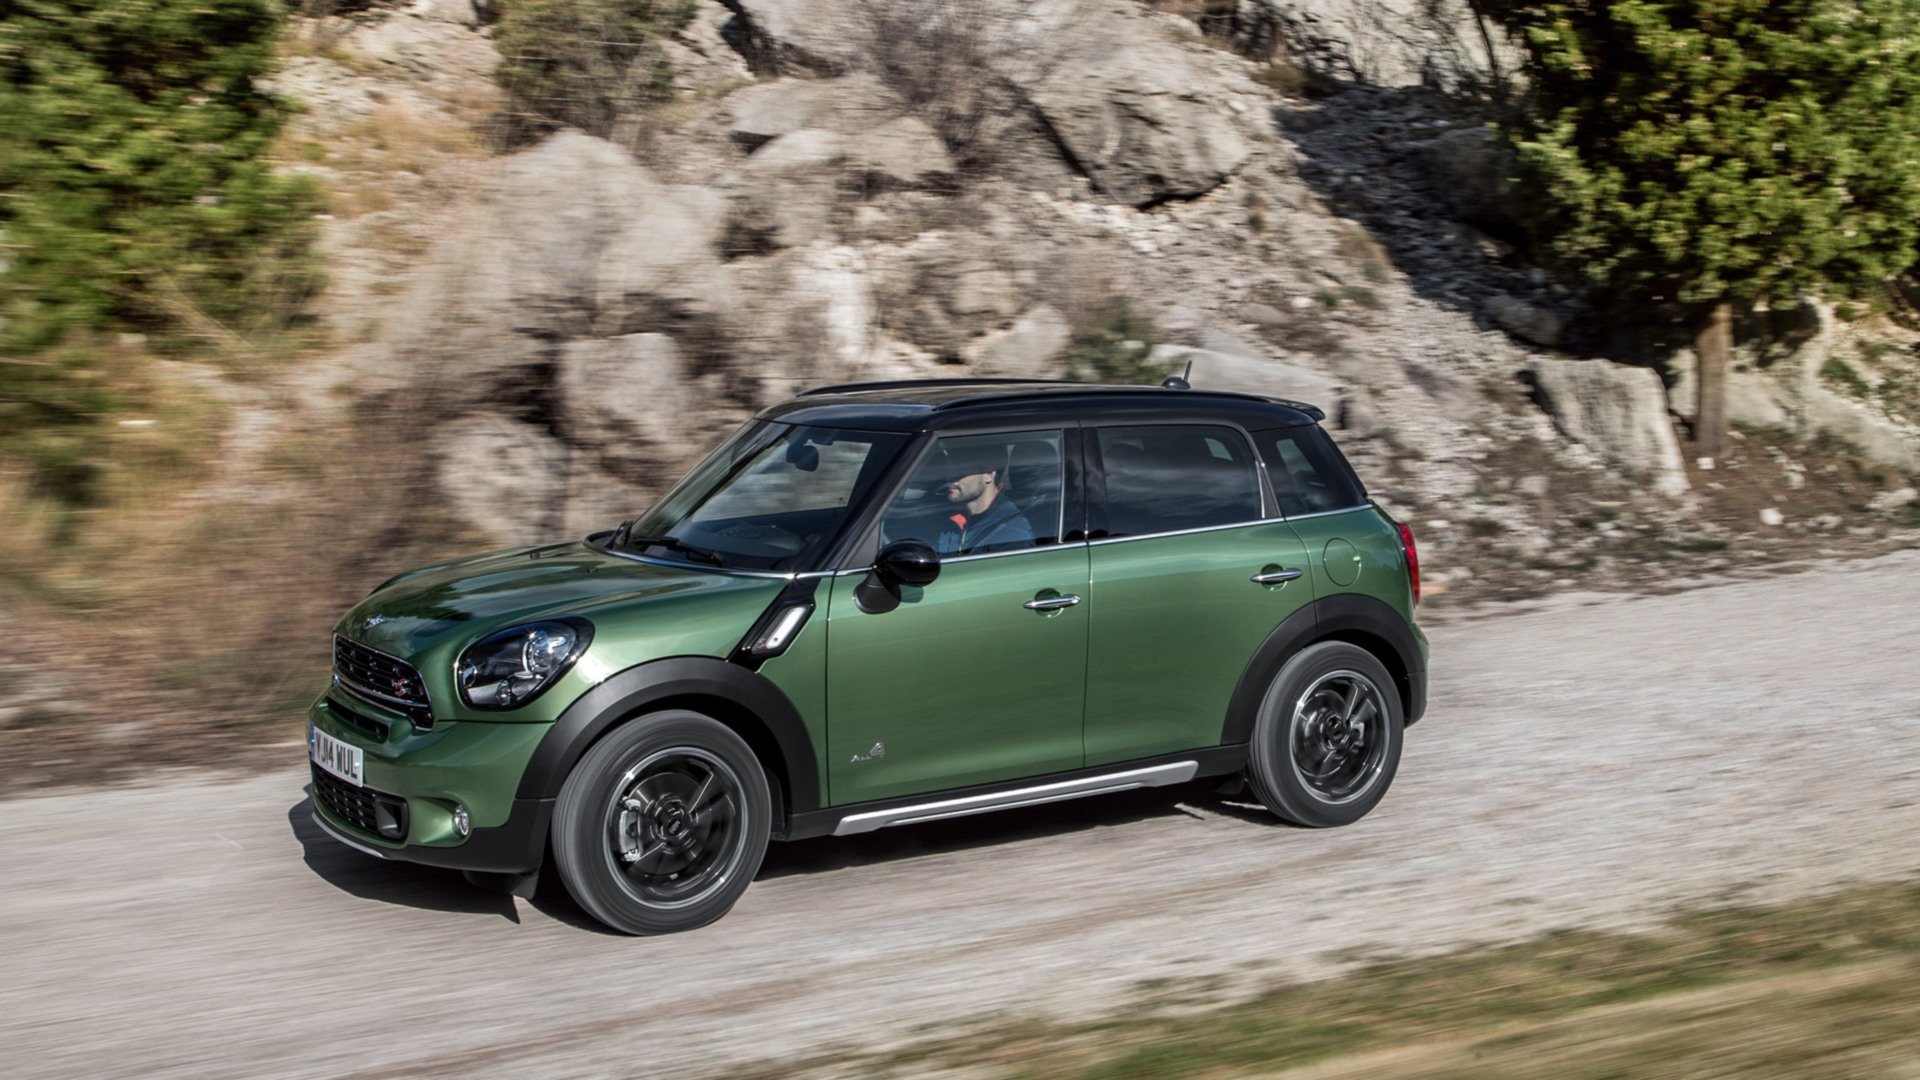 Best Mini Countryman 2015 background ID:160032 for High Resolution hd 1080p computer